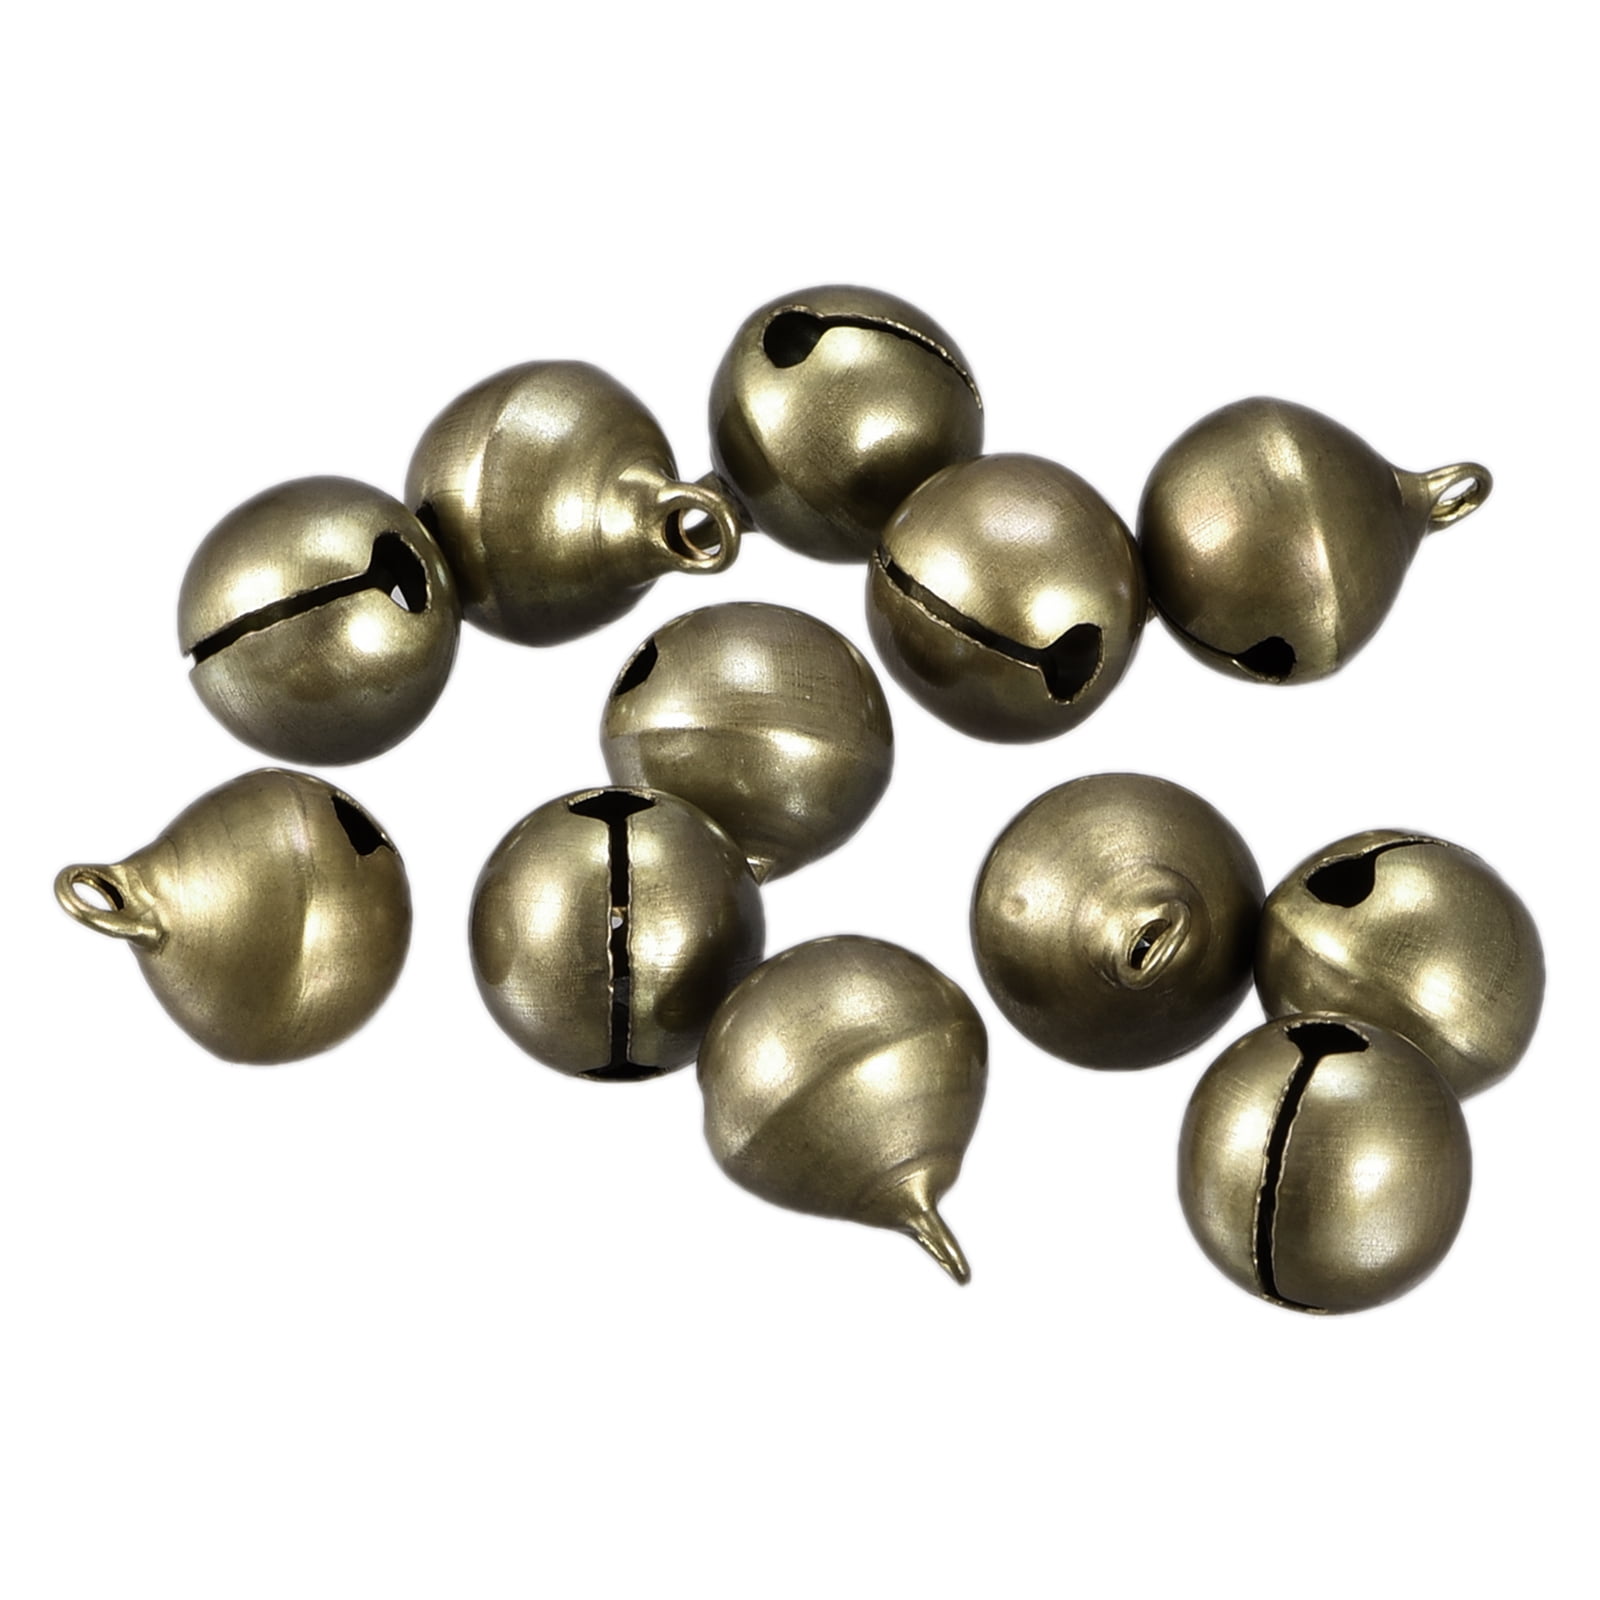 YOETSPDS 50 Pcs Small Bells Bronze Jingle Bells for Crafts Electroplated Copper Bells 1/2 Inches Craft Bells for Gift Box Decoration Pet Christmas DIY Crafts